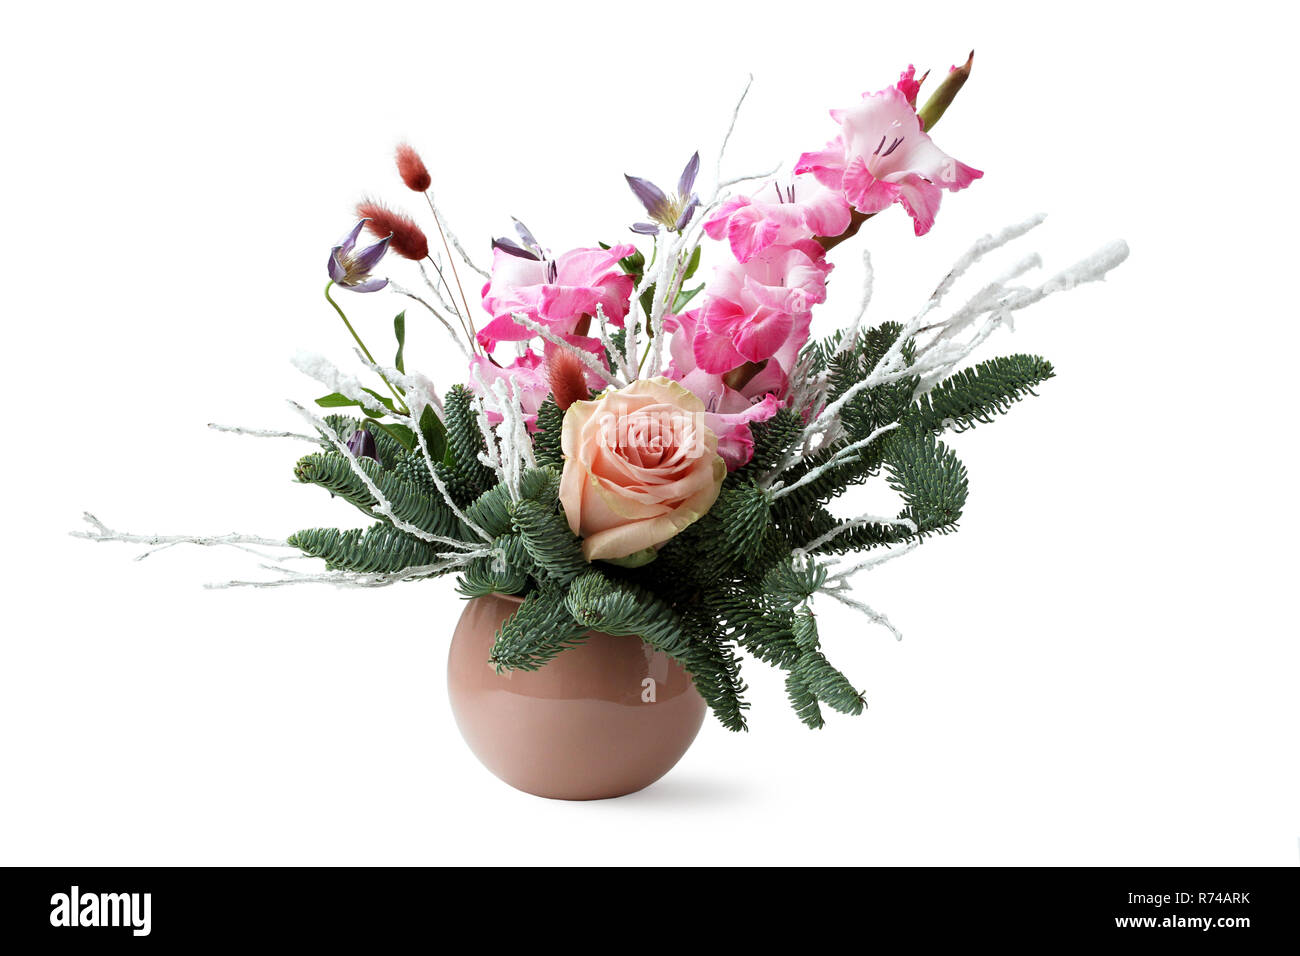 Winter Composition In A Brown Pot Spruce Branches Pink Gladiolus Cream Rose Dried Flower Spikelets And Twigs Covered With Artificial Snow Stock Photo Alamy